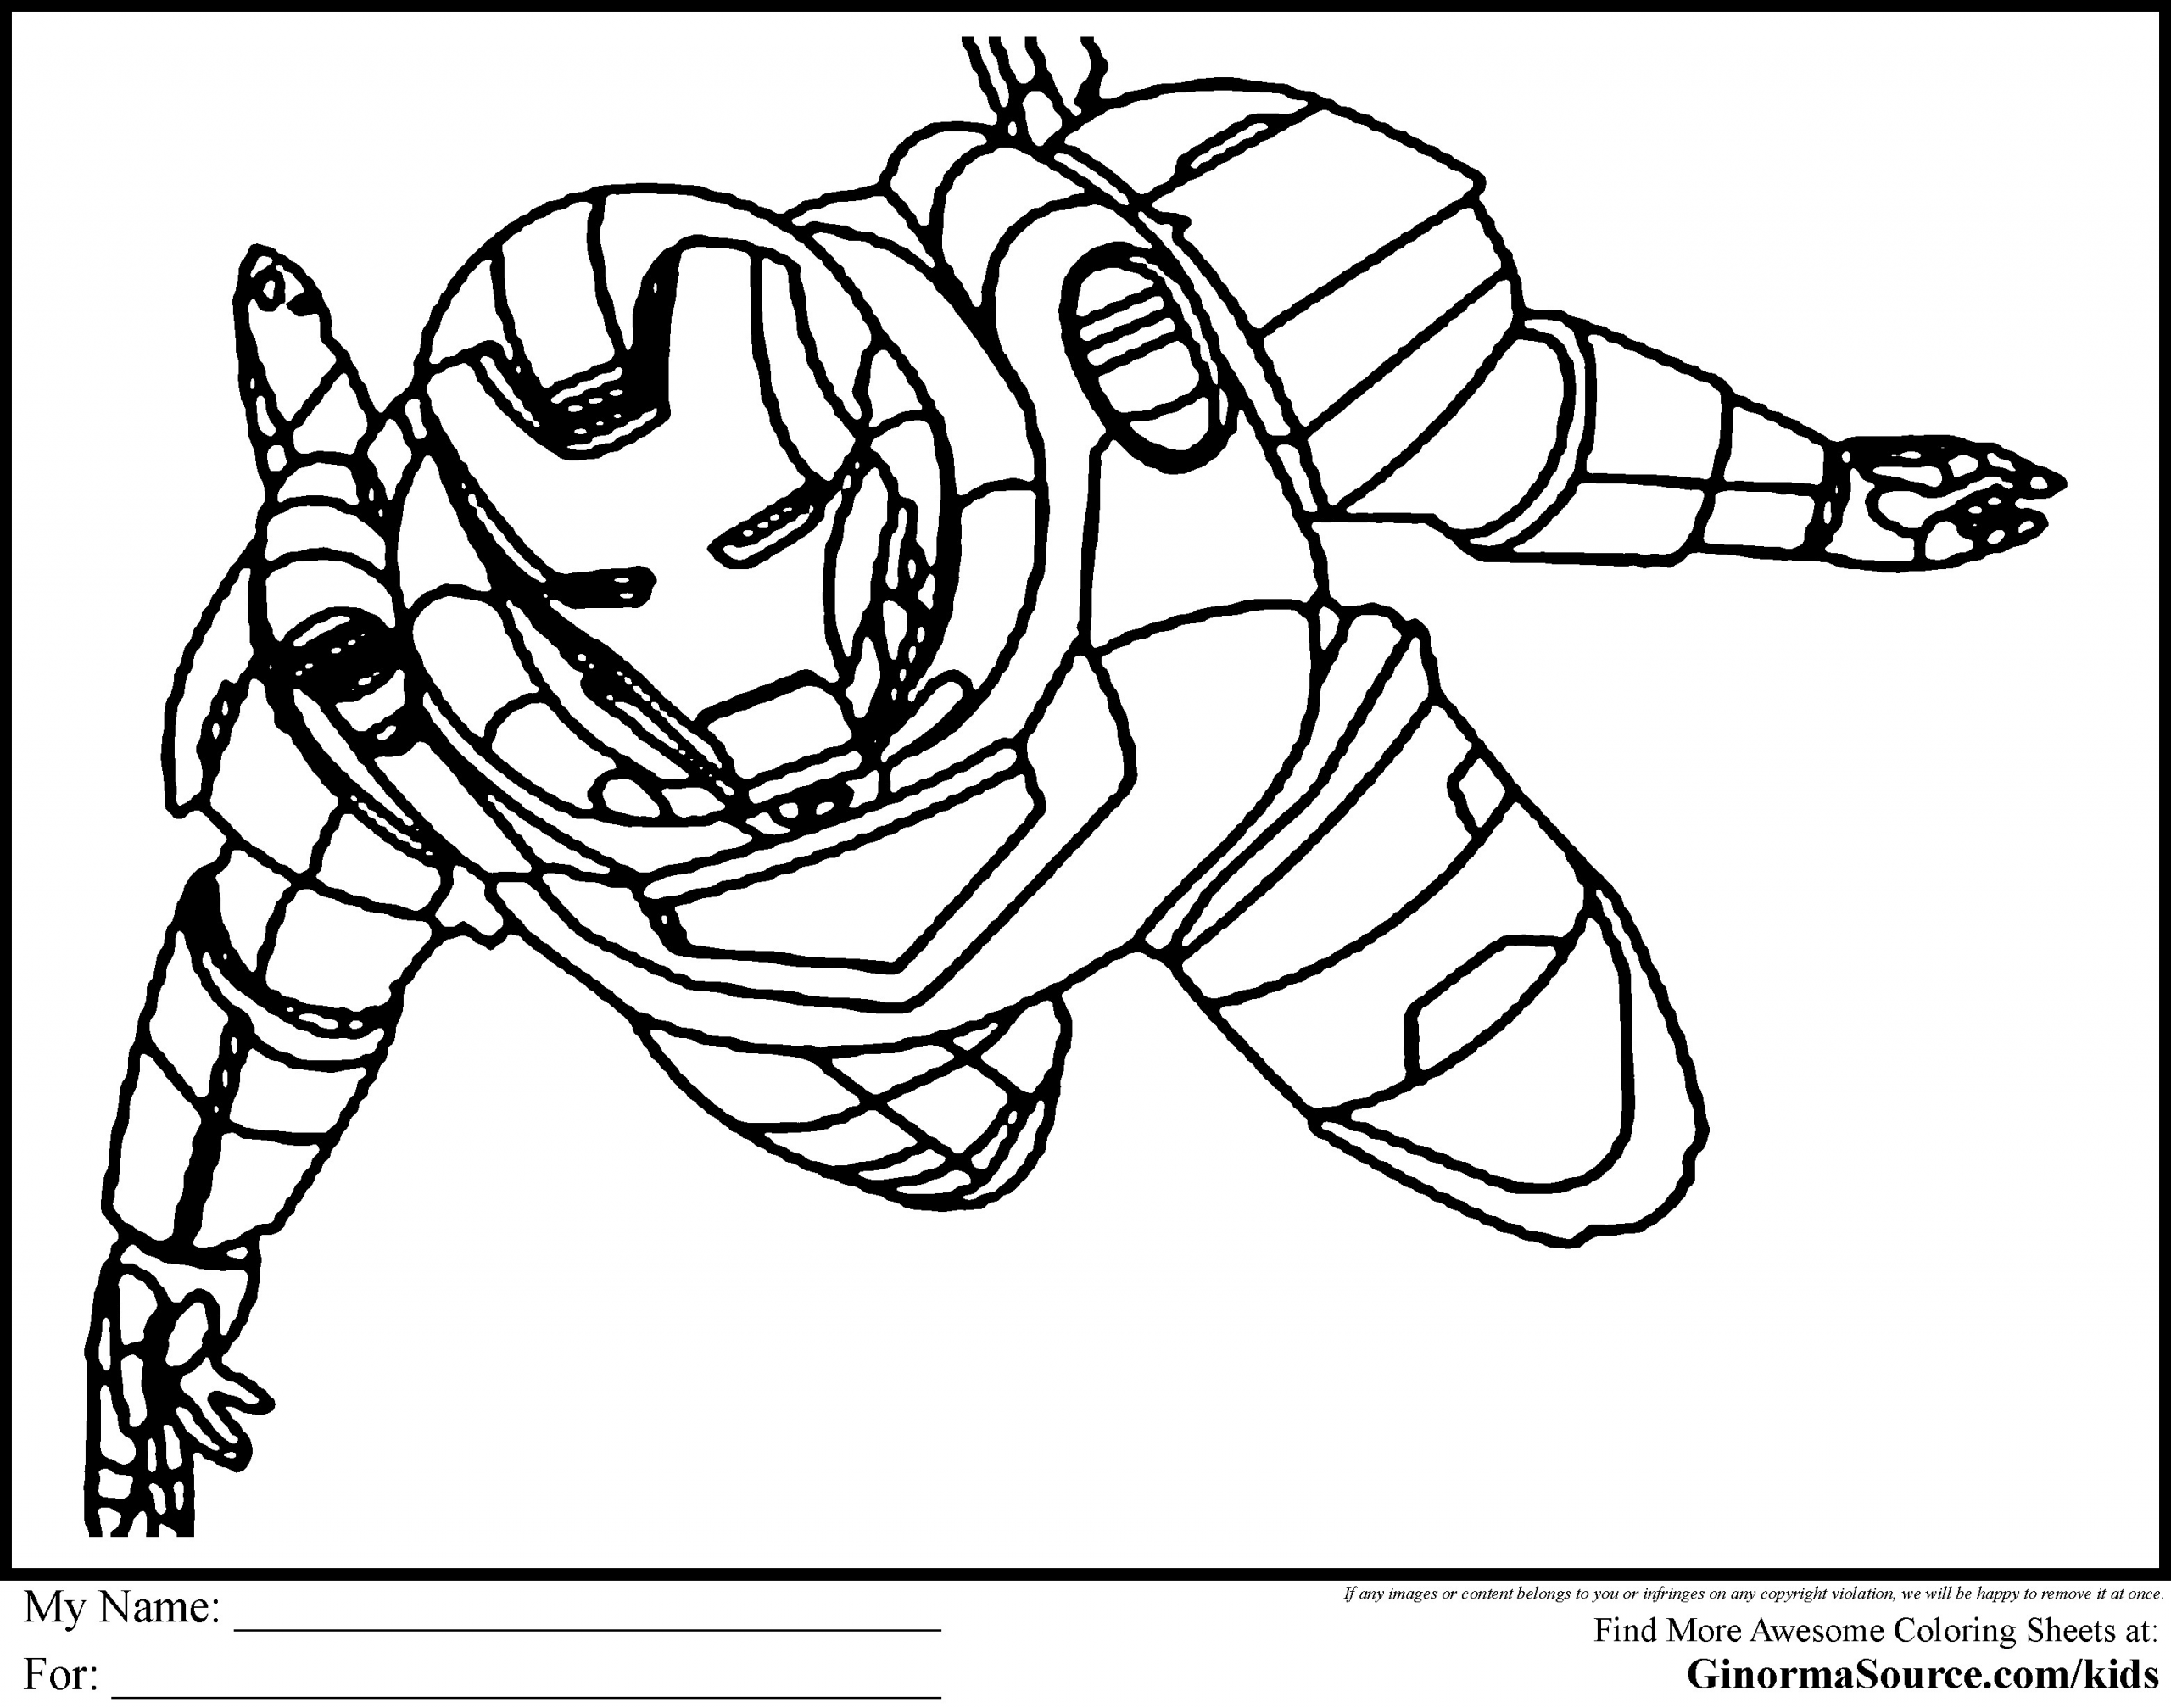 Super Hero Coloring Pages For Kids
 Superhero Coloring Pages Pdf Coloring Home